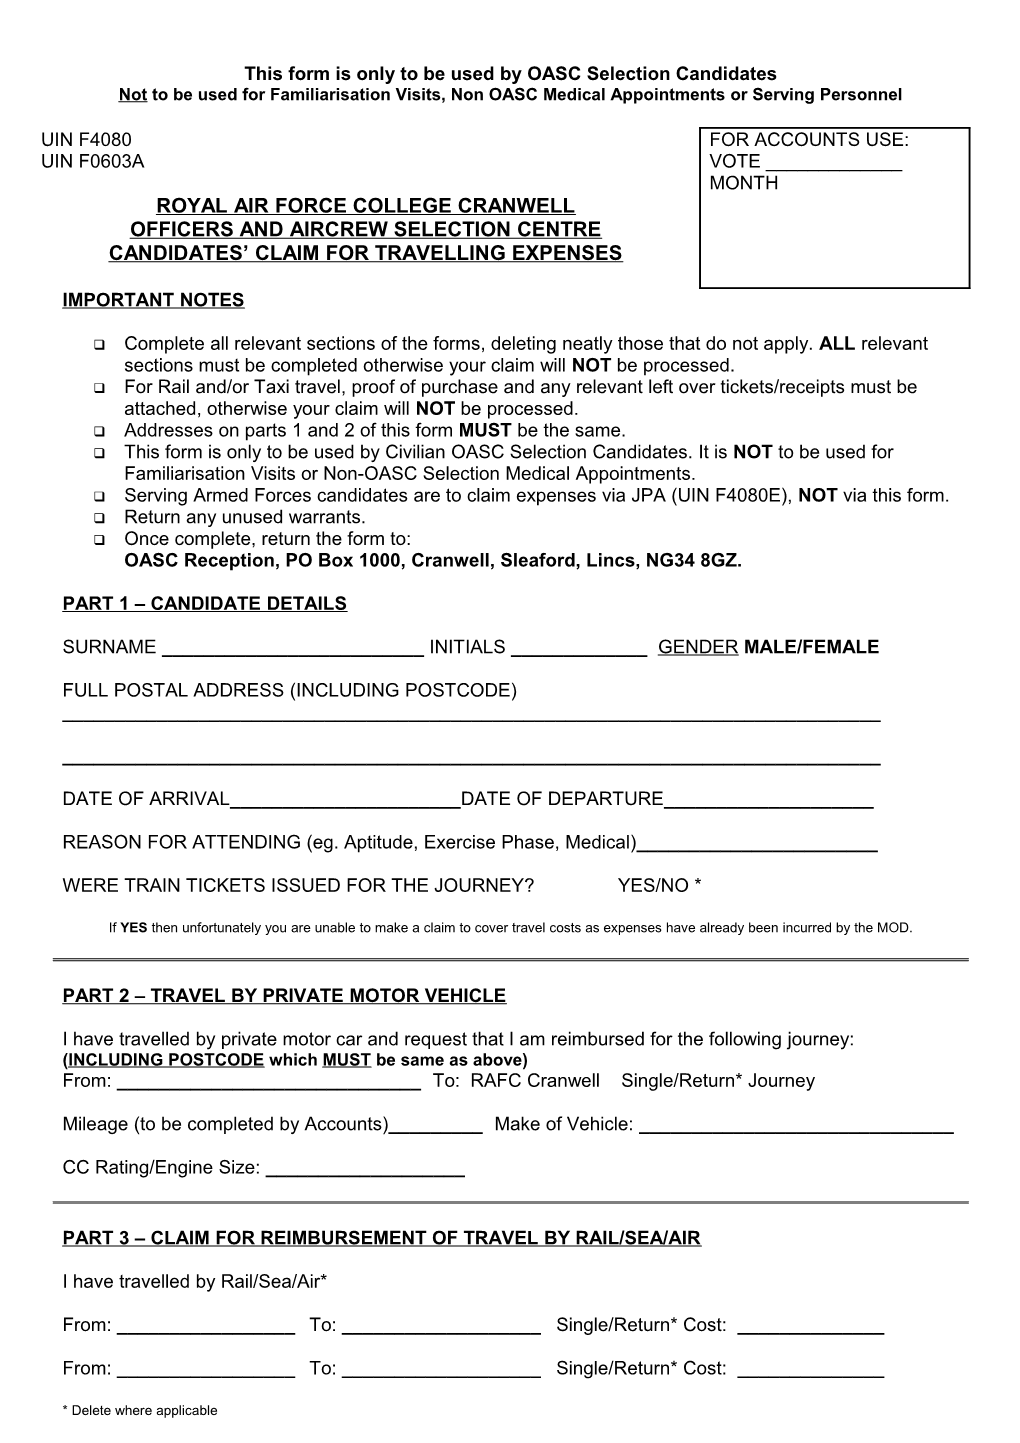 This Form Is Only to Be Used by OASC Selection Candidates